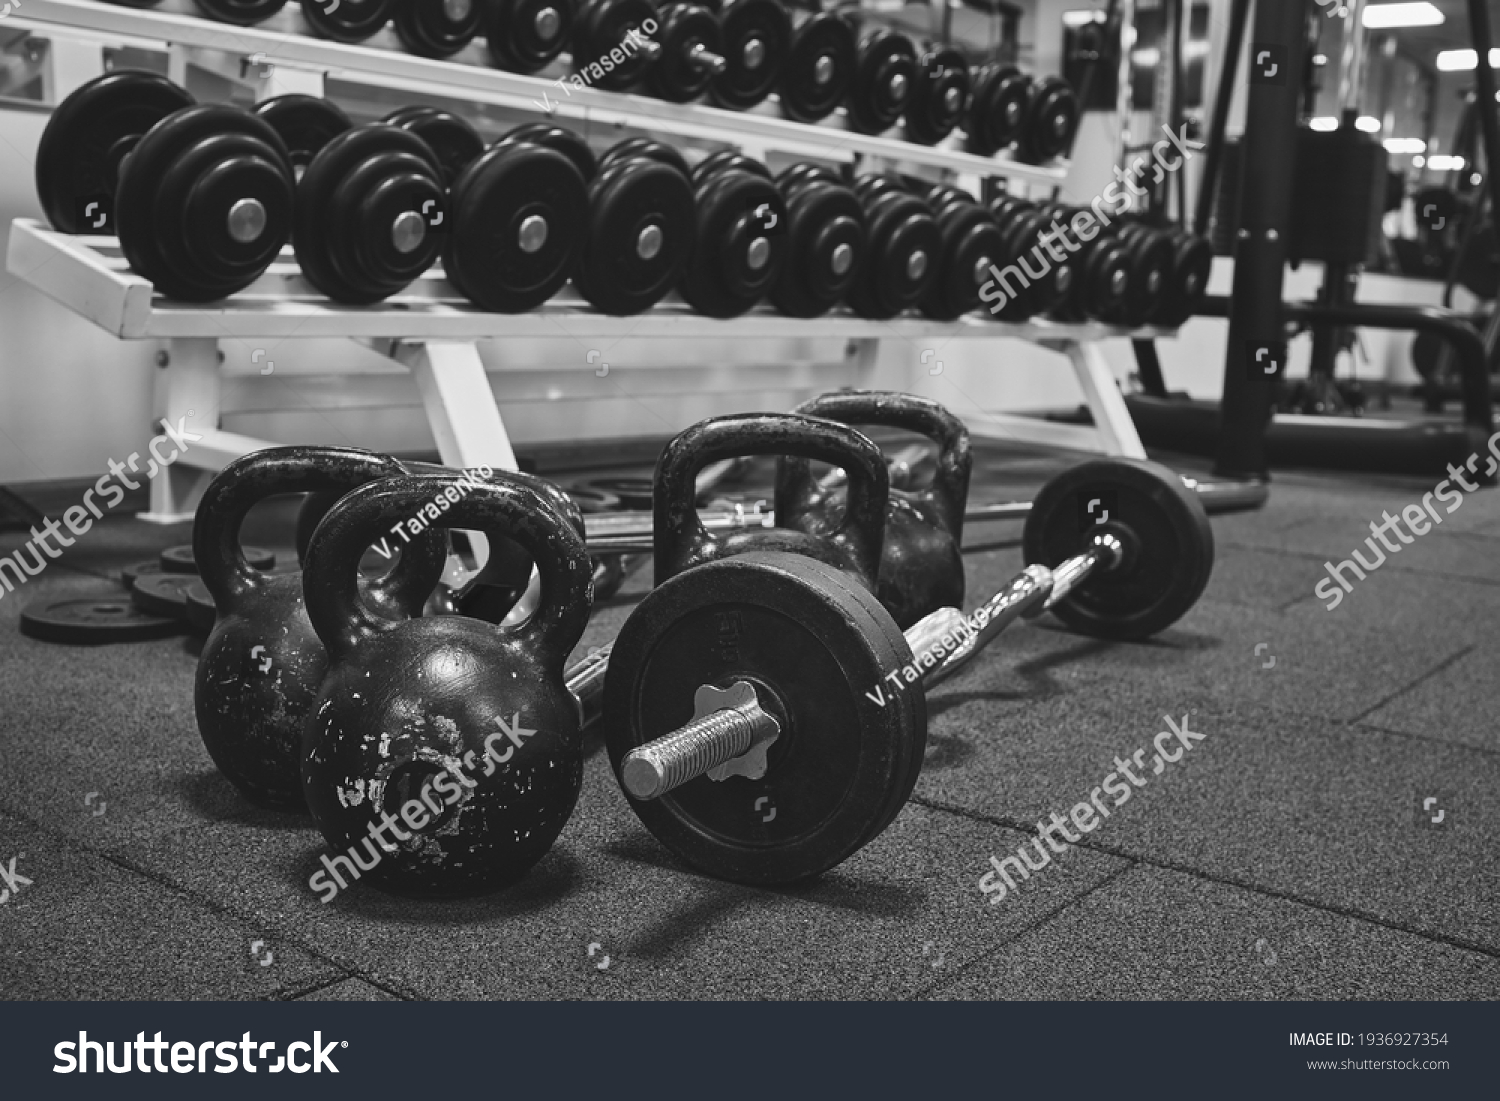 Dumbbells and kettlebells on a floor. Bodybuilding equipment. Fitness or bodybuilding concept background. black and white photography #1936927354